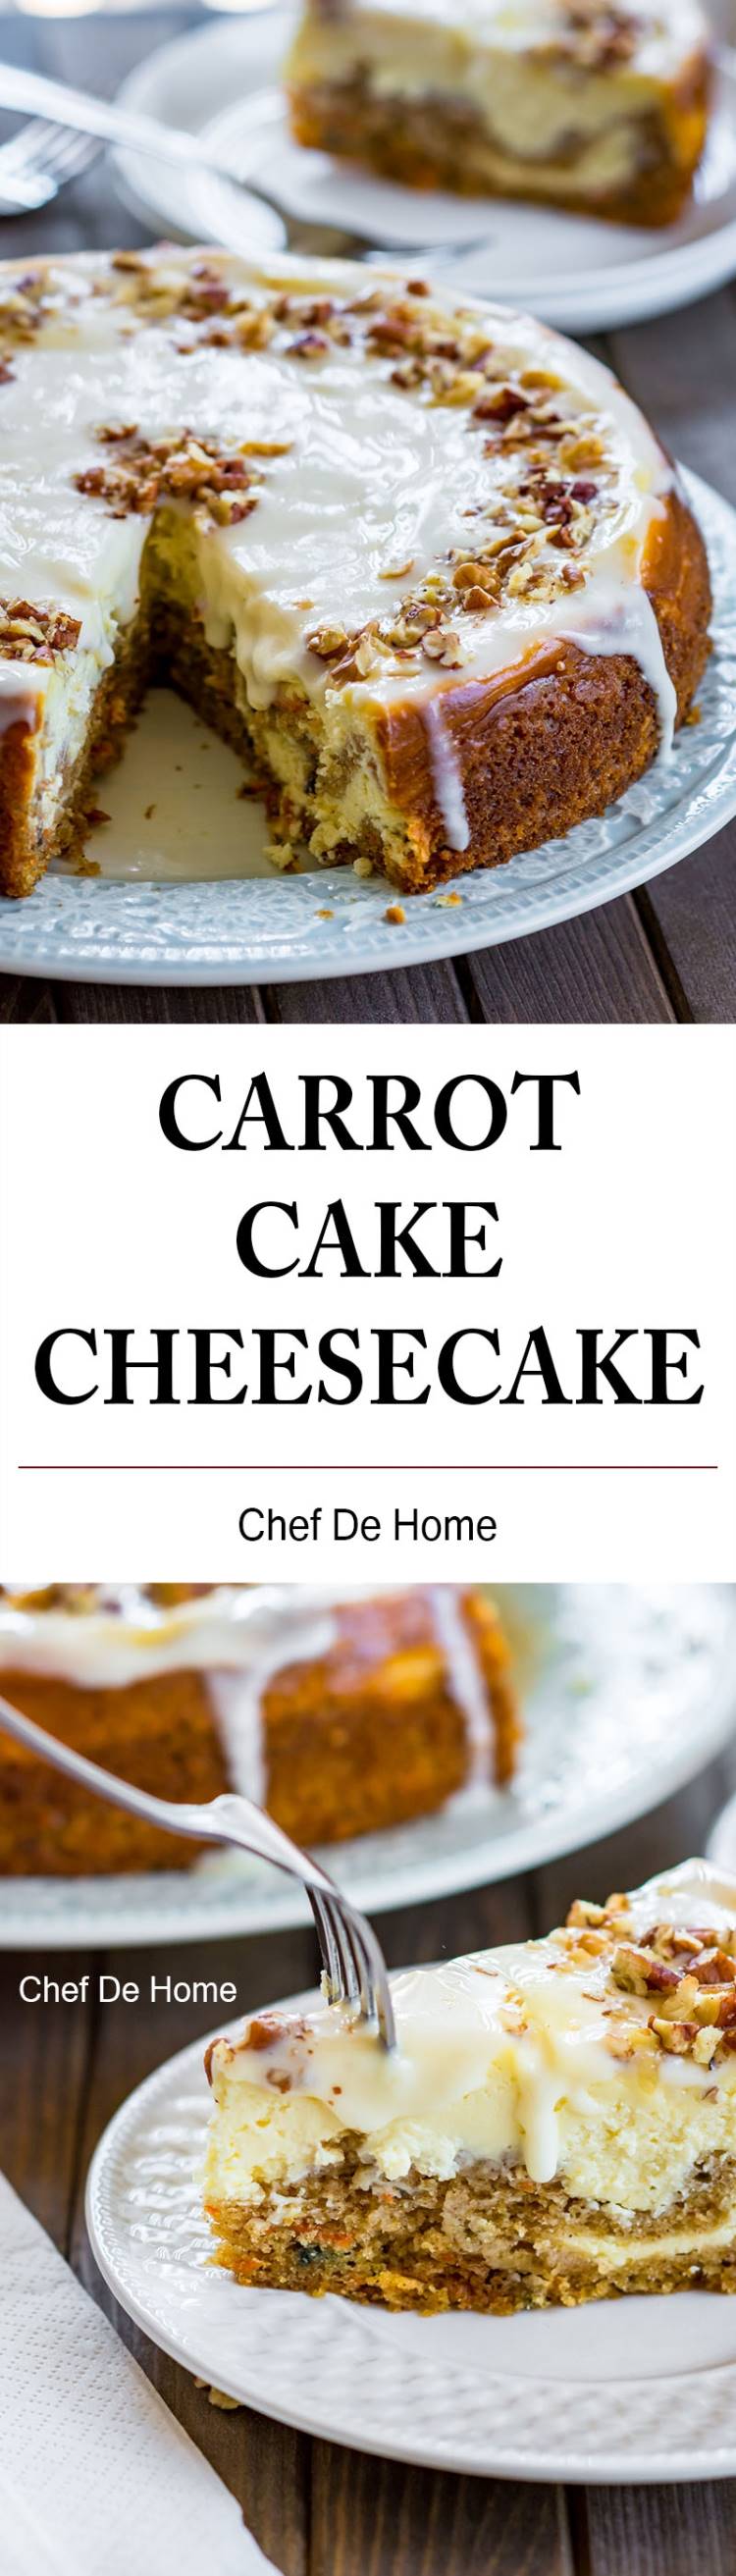 Carrot Cake Cheesecake long picture with slice and whole cake | chefdehome.com